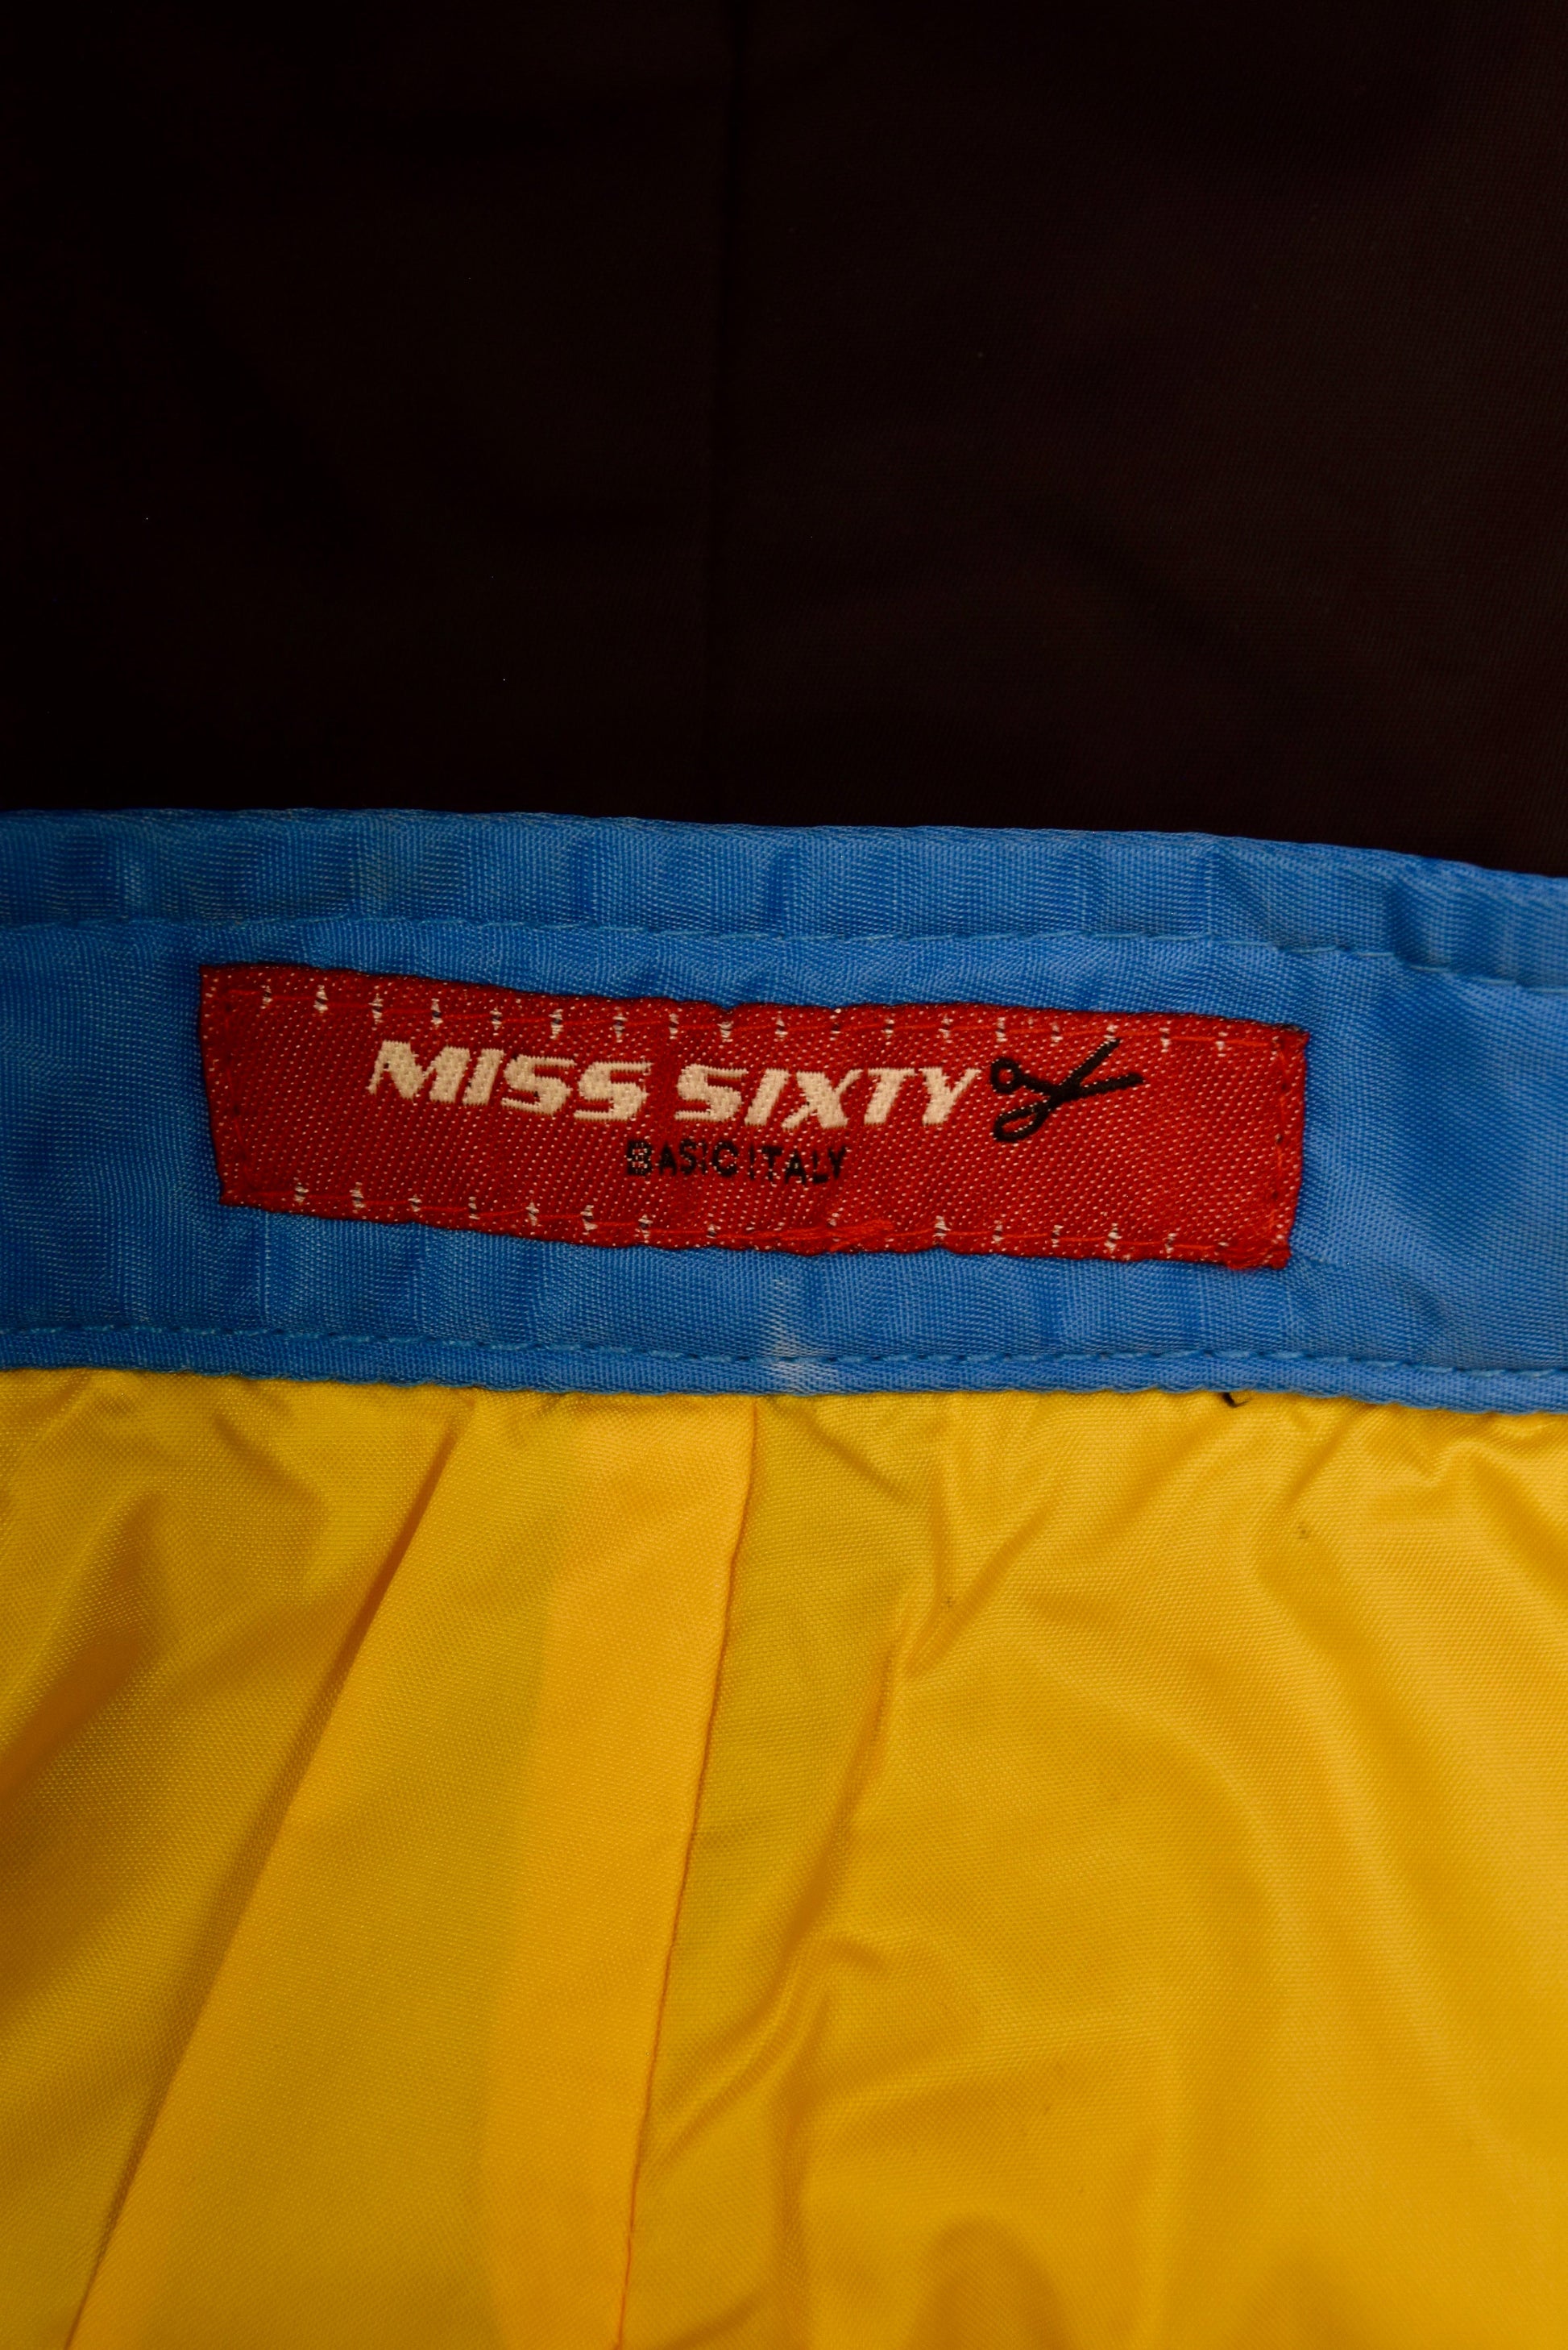 Y2K Miss Sixty Skirt Technical - Racing Aesthetic Size M Black Blue Yellow